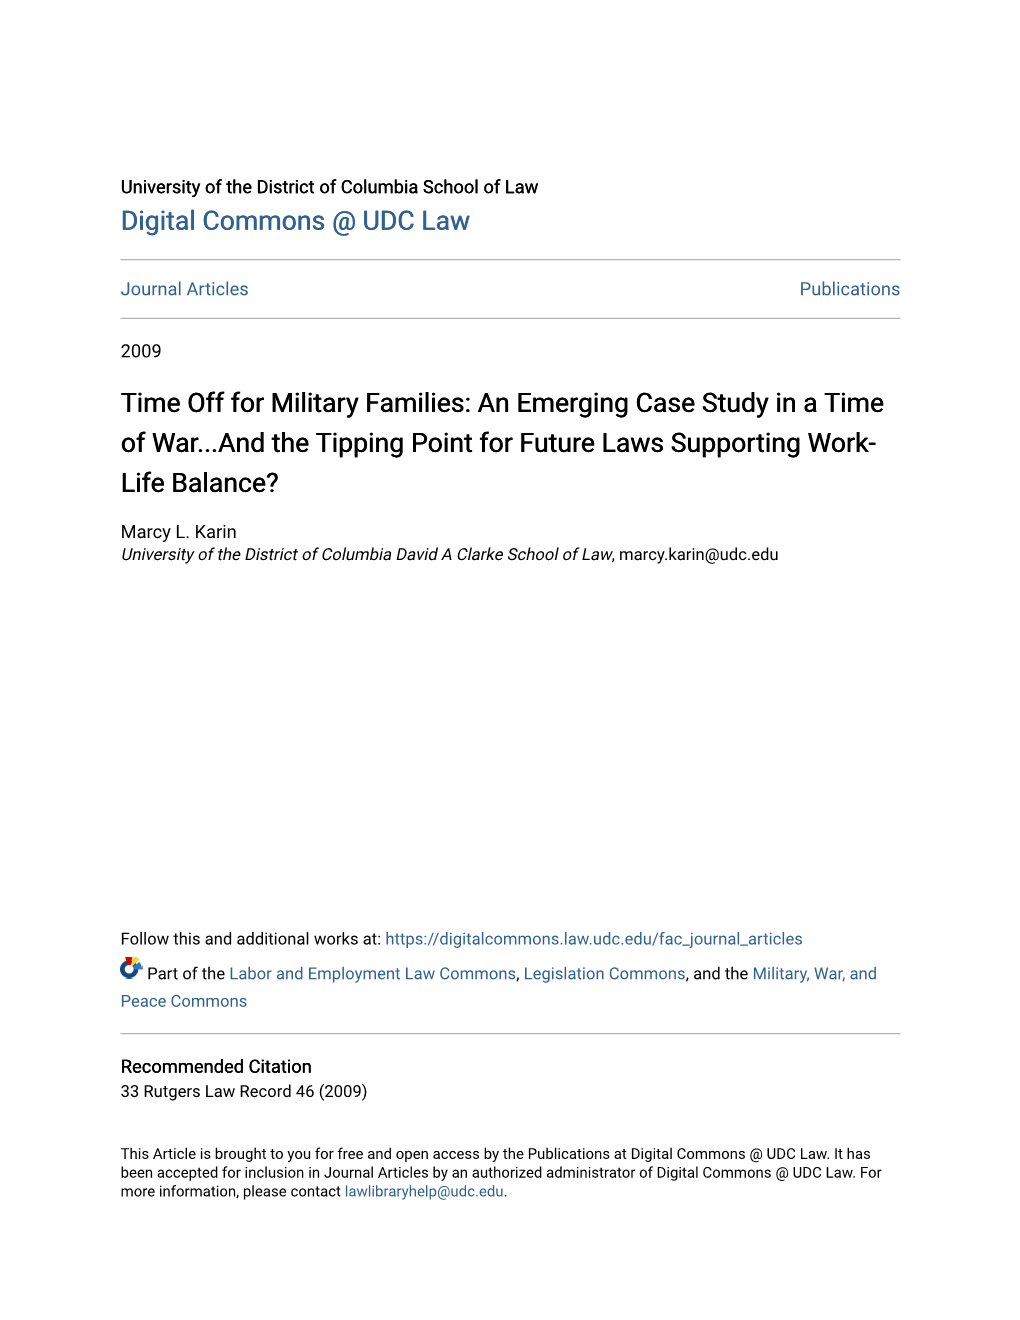 Time Off for Military Families: an Emerging Case Study in a Time of War...And the Tipping Point for Future Laws Supporting Work- Life Balance?